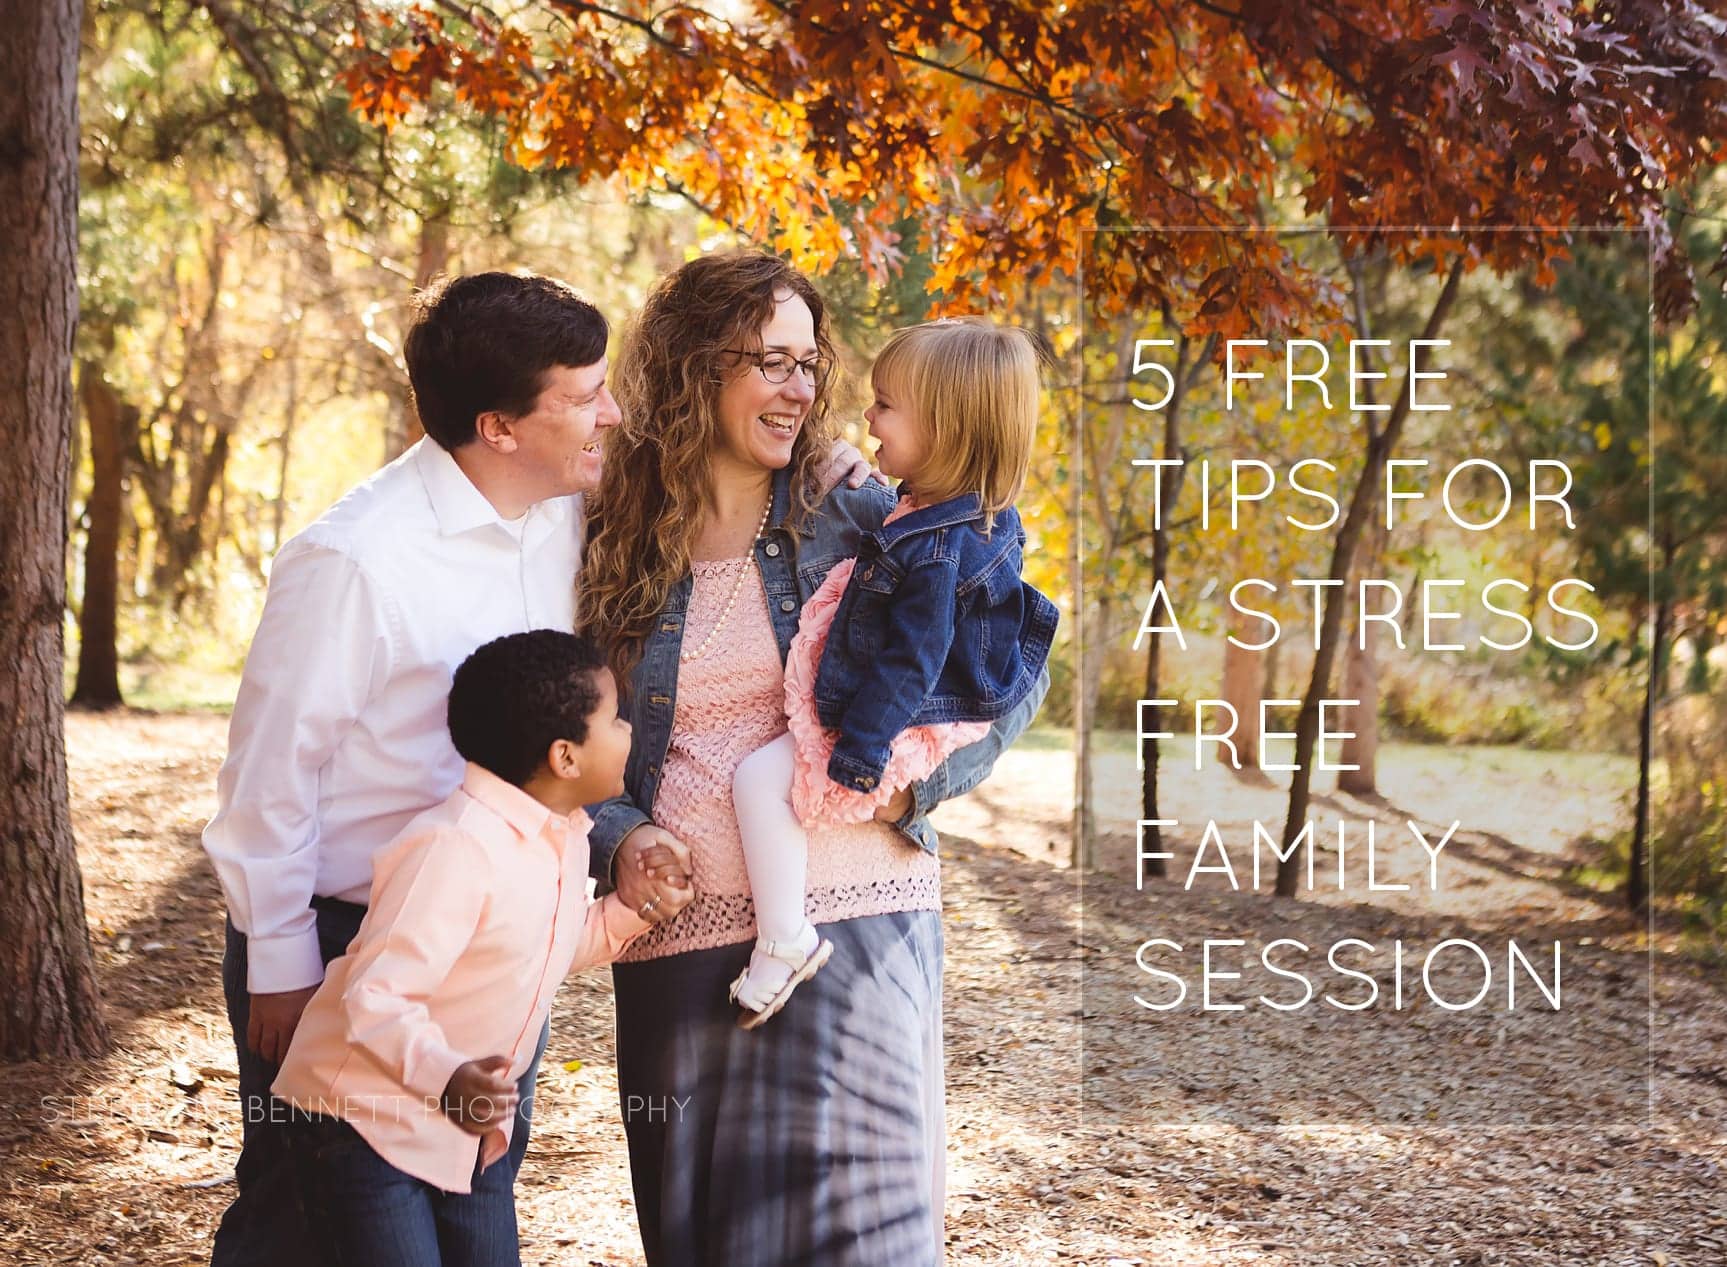 Outdoor family session tips northfield mn